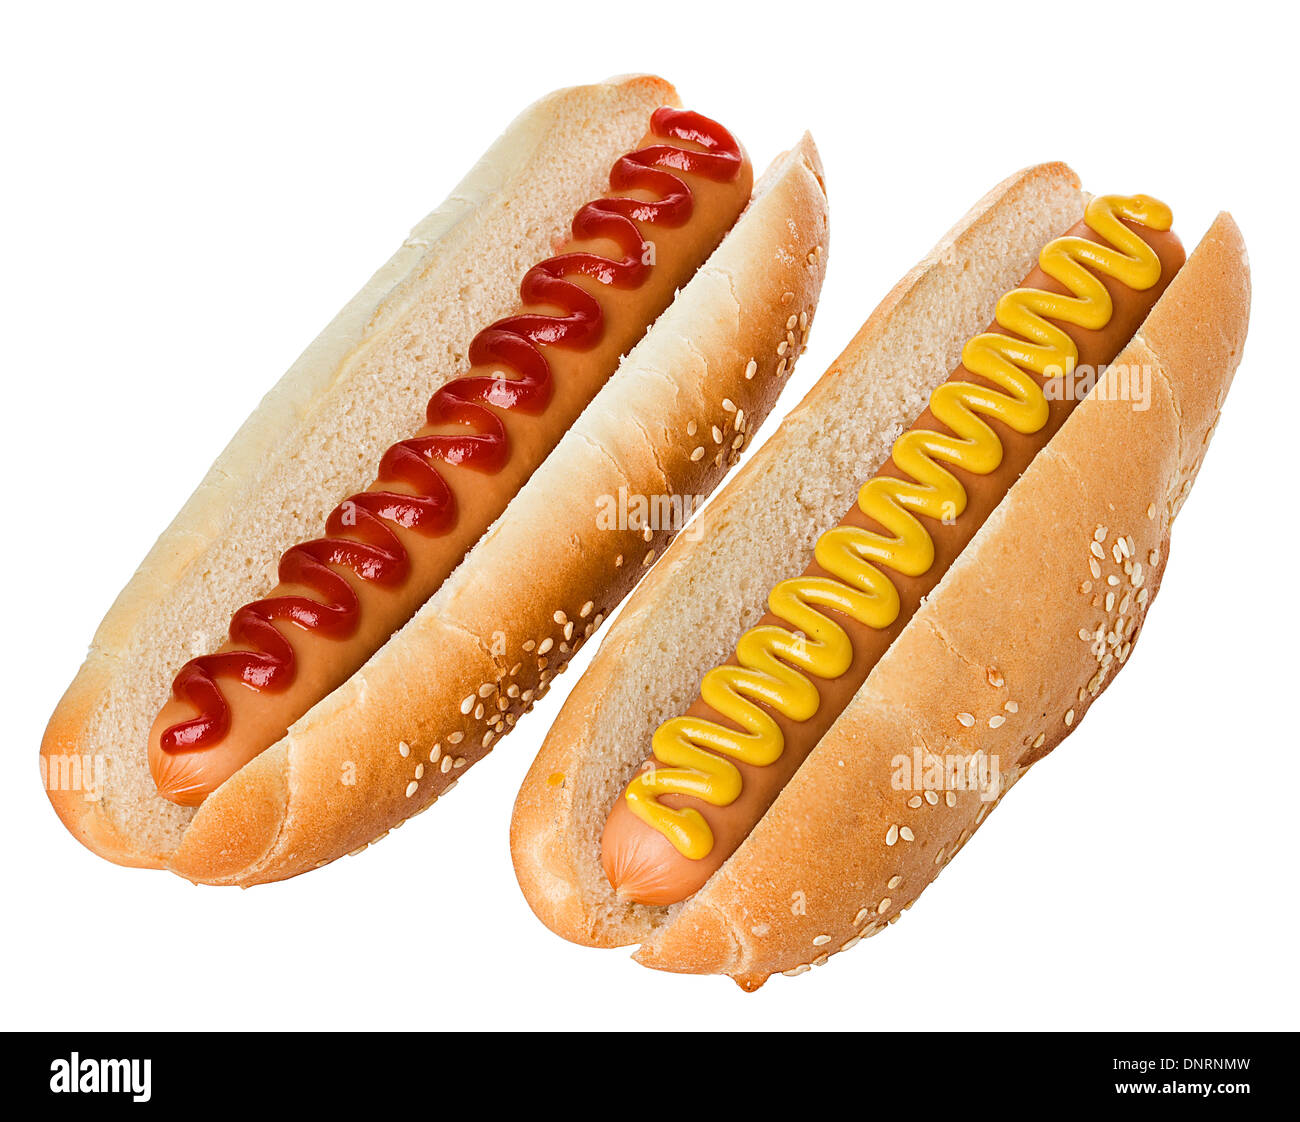 Hot dogs Banque D'Images